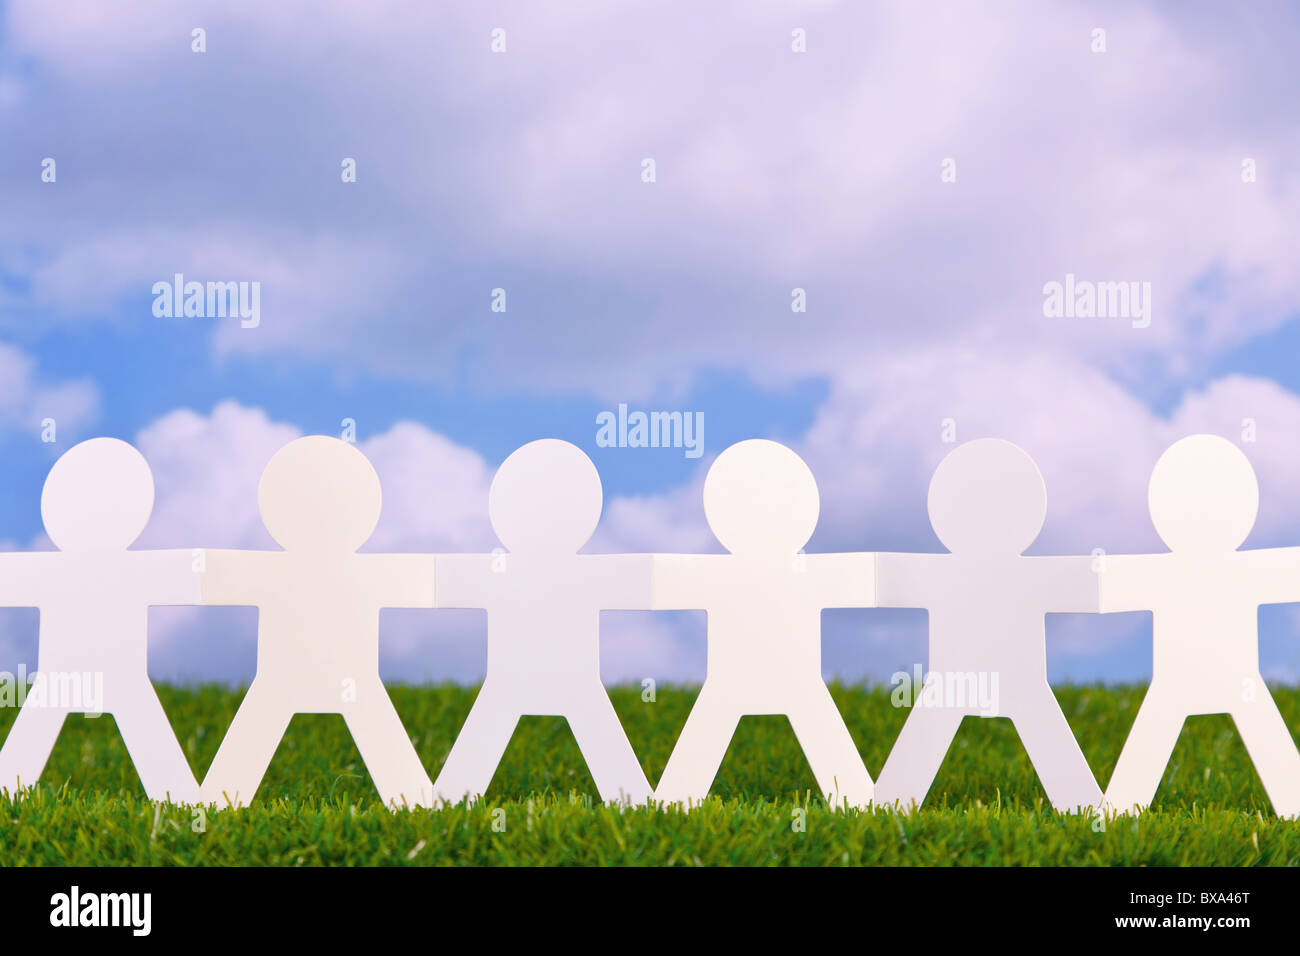 Concept image of paper men holding hands in a field with sky background Stock Photo